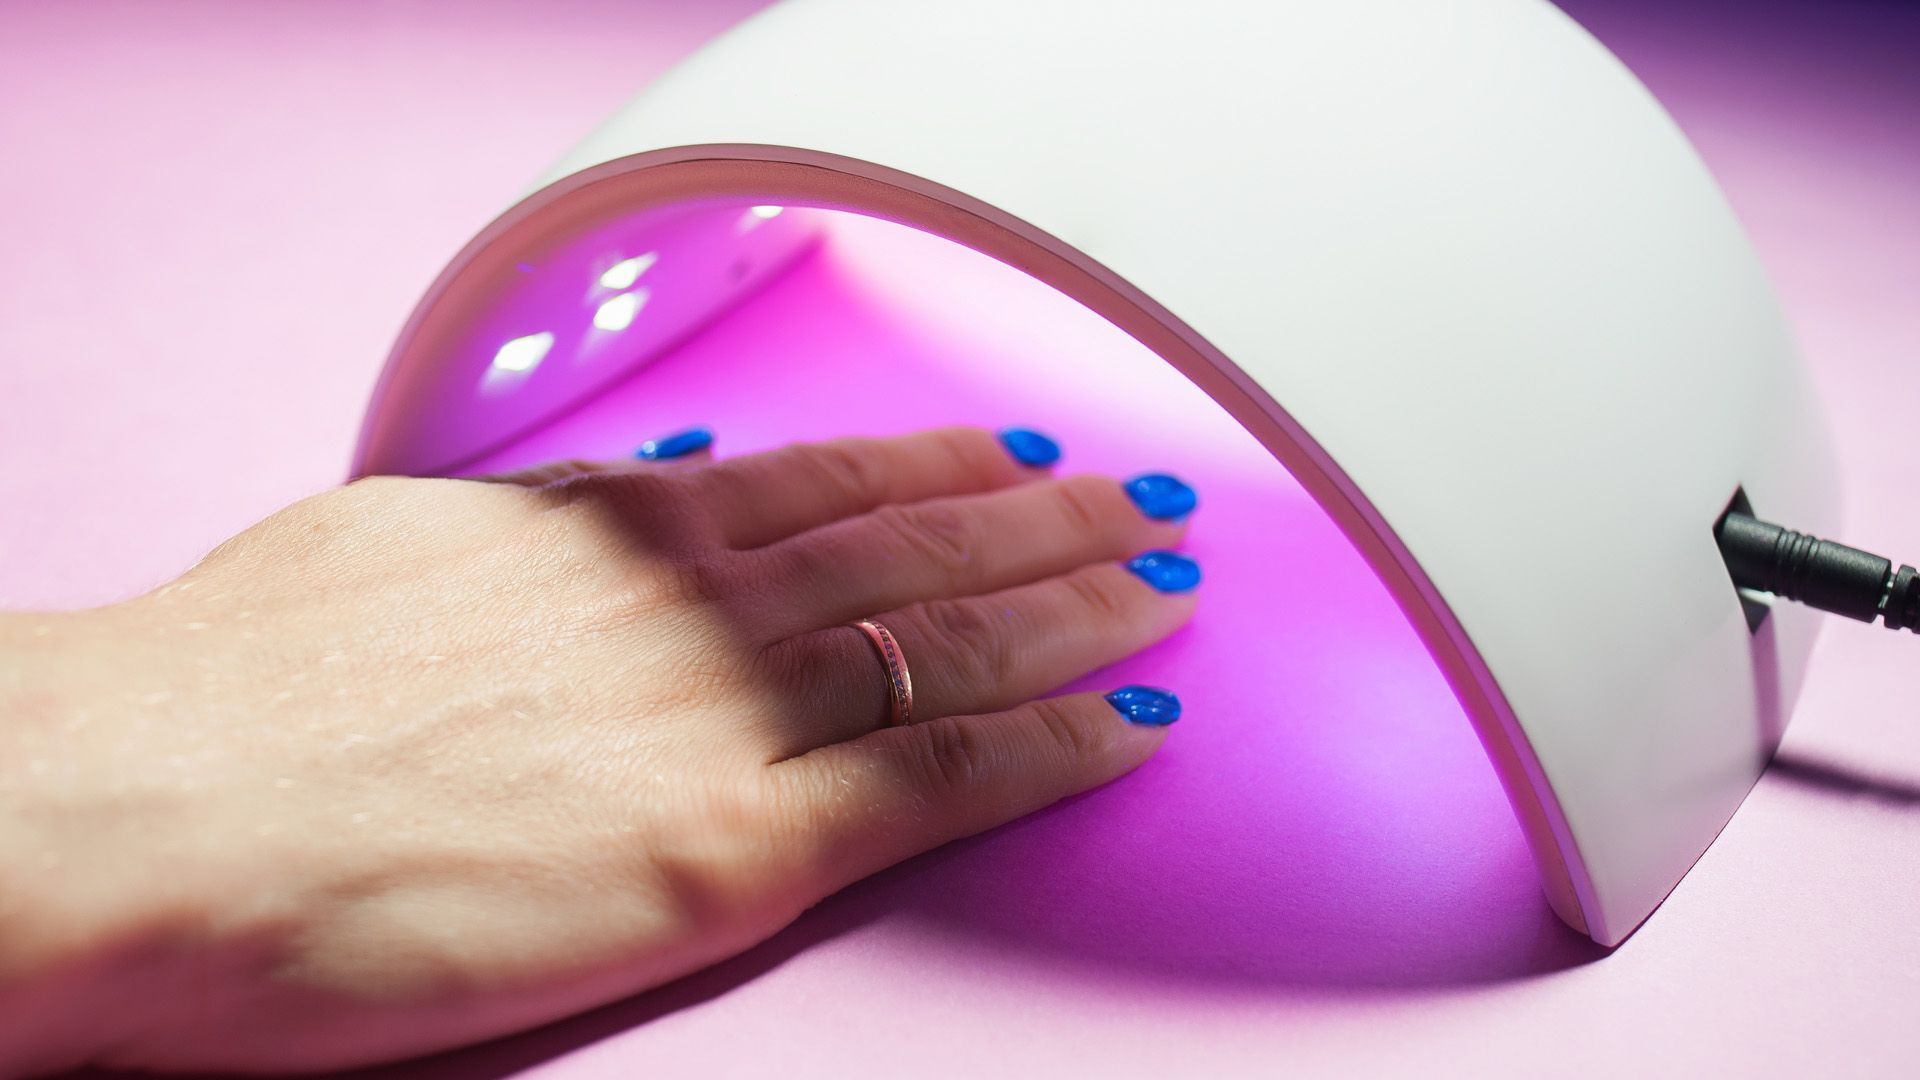 According to study: UV nail dryers increase the risk of skin cancer